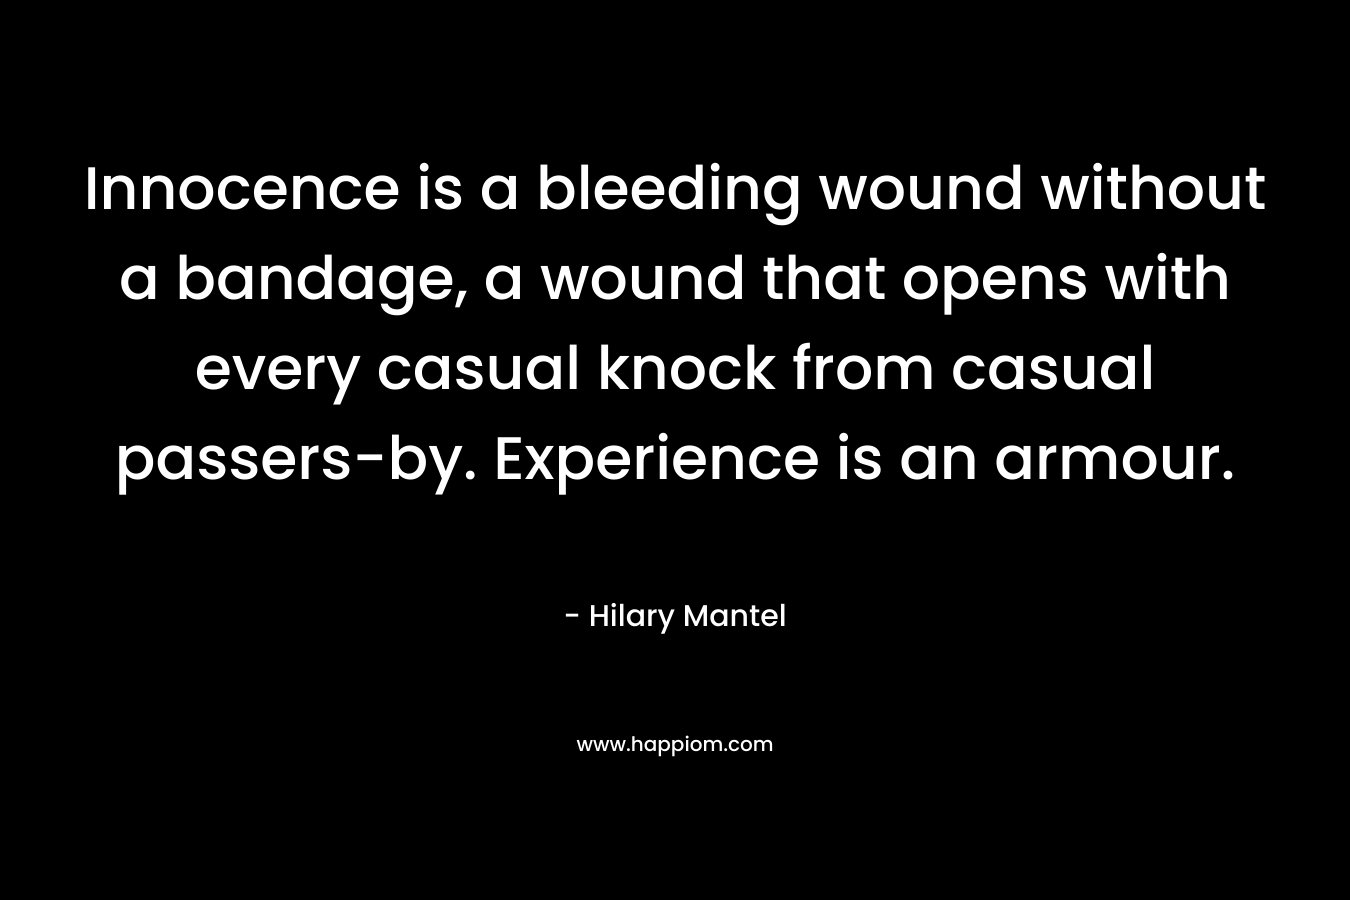 Innocence is a bleeding wound without a bandage, a wound that opens with every casual knock from casual passers-by. Experience is an armour. – Hilary Mantel